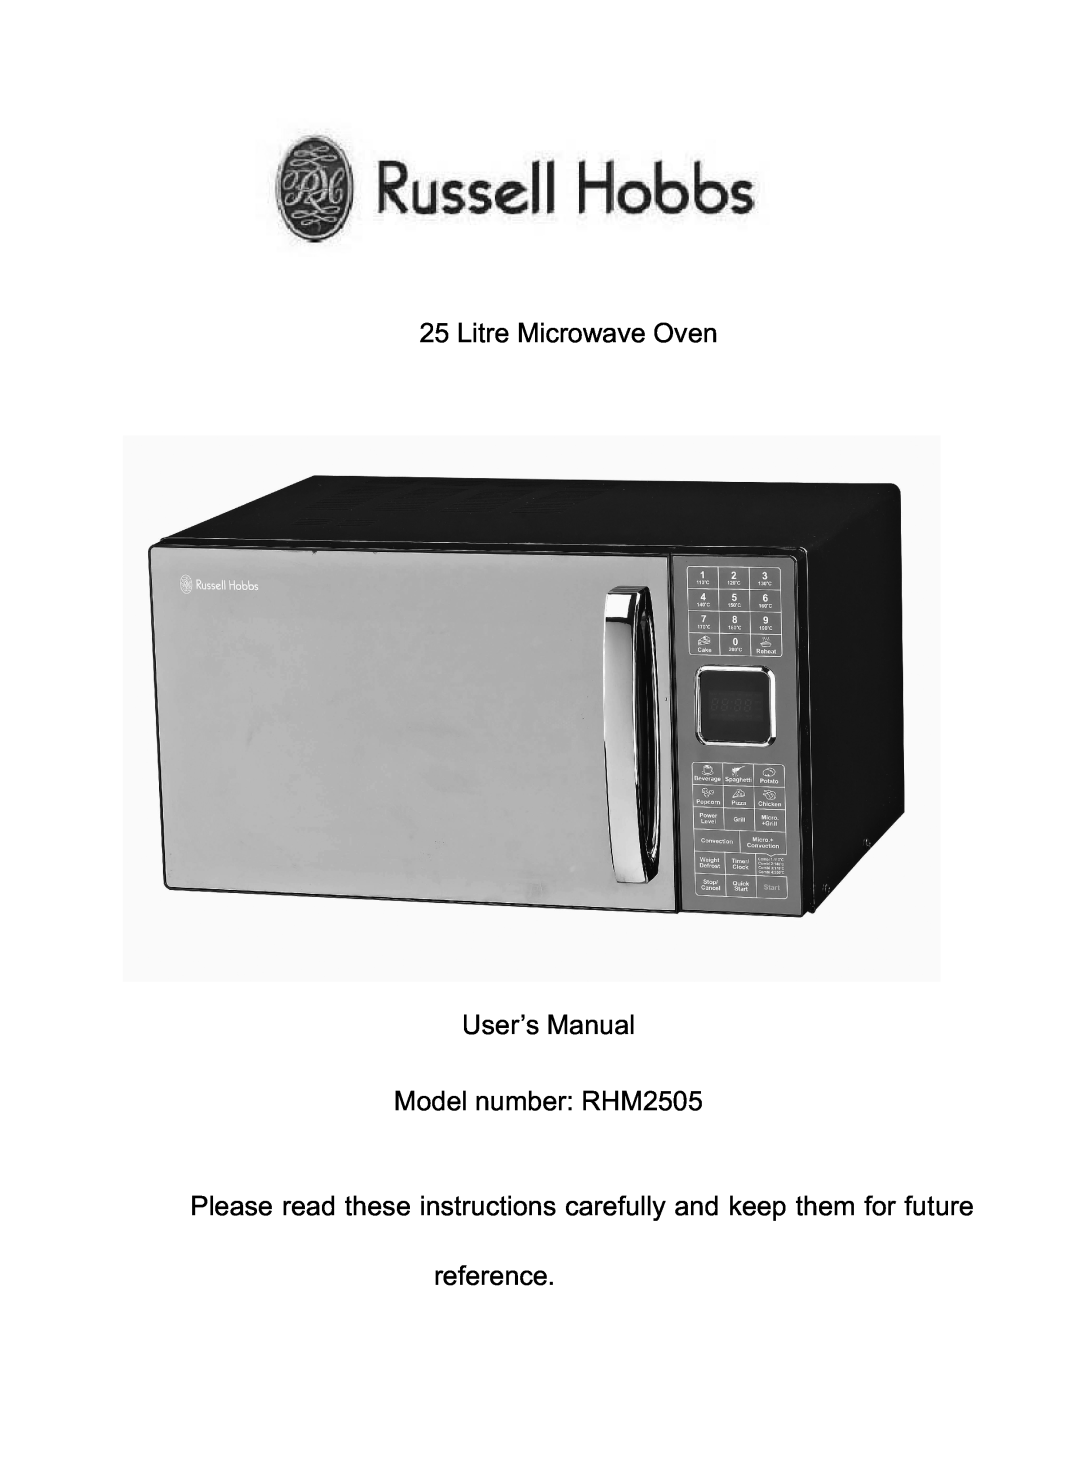 Russell Hobbs user manual Litre Microwave Oven User’s Manual Model number RHM2505, reference 